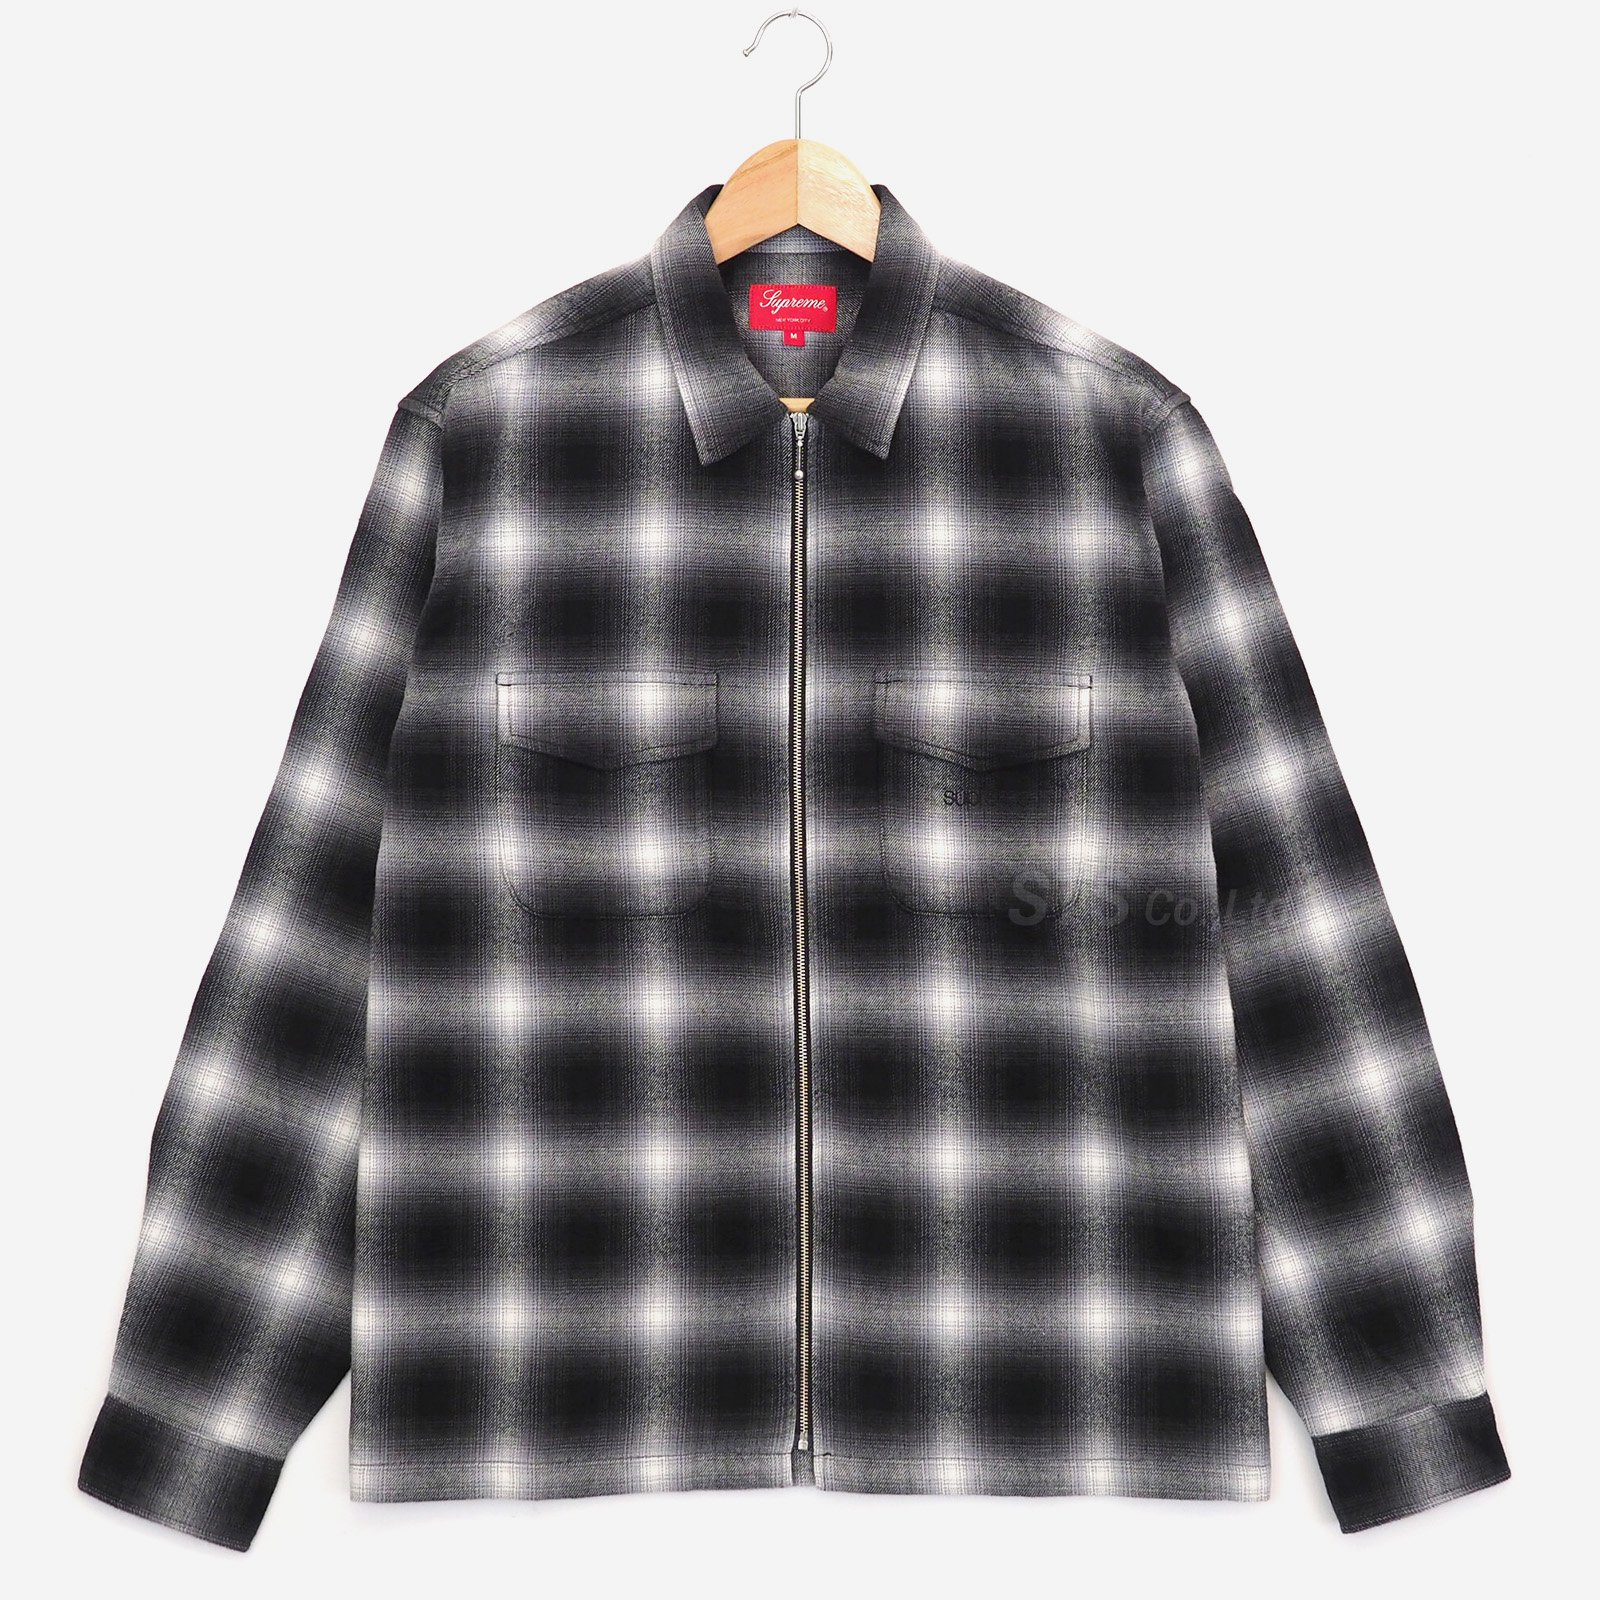 Supreme Shadow Plaid Flannel Zip Up ブラウン トップス シャツ 